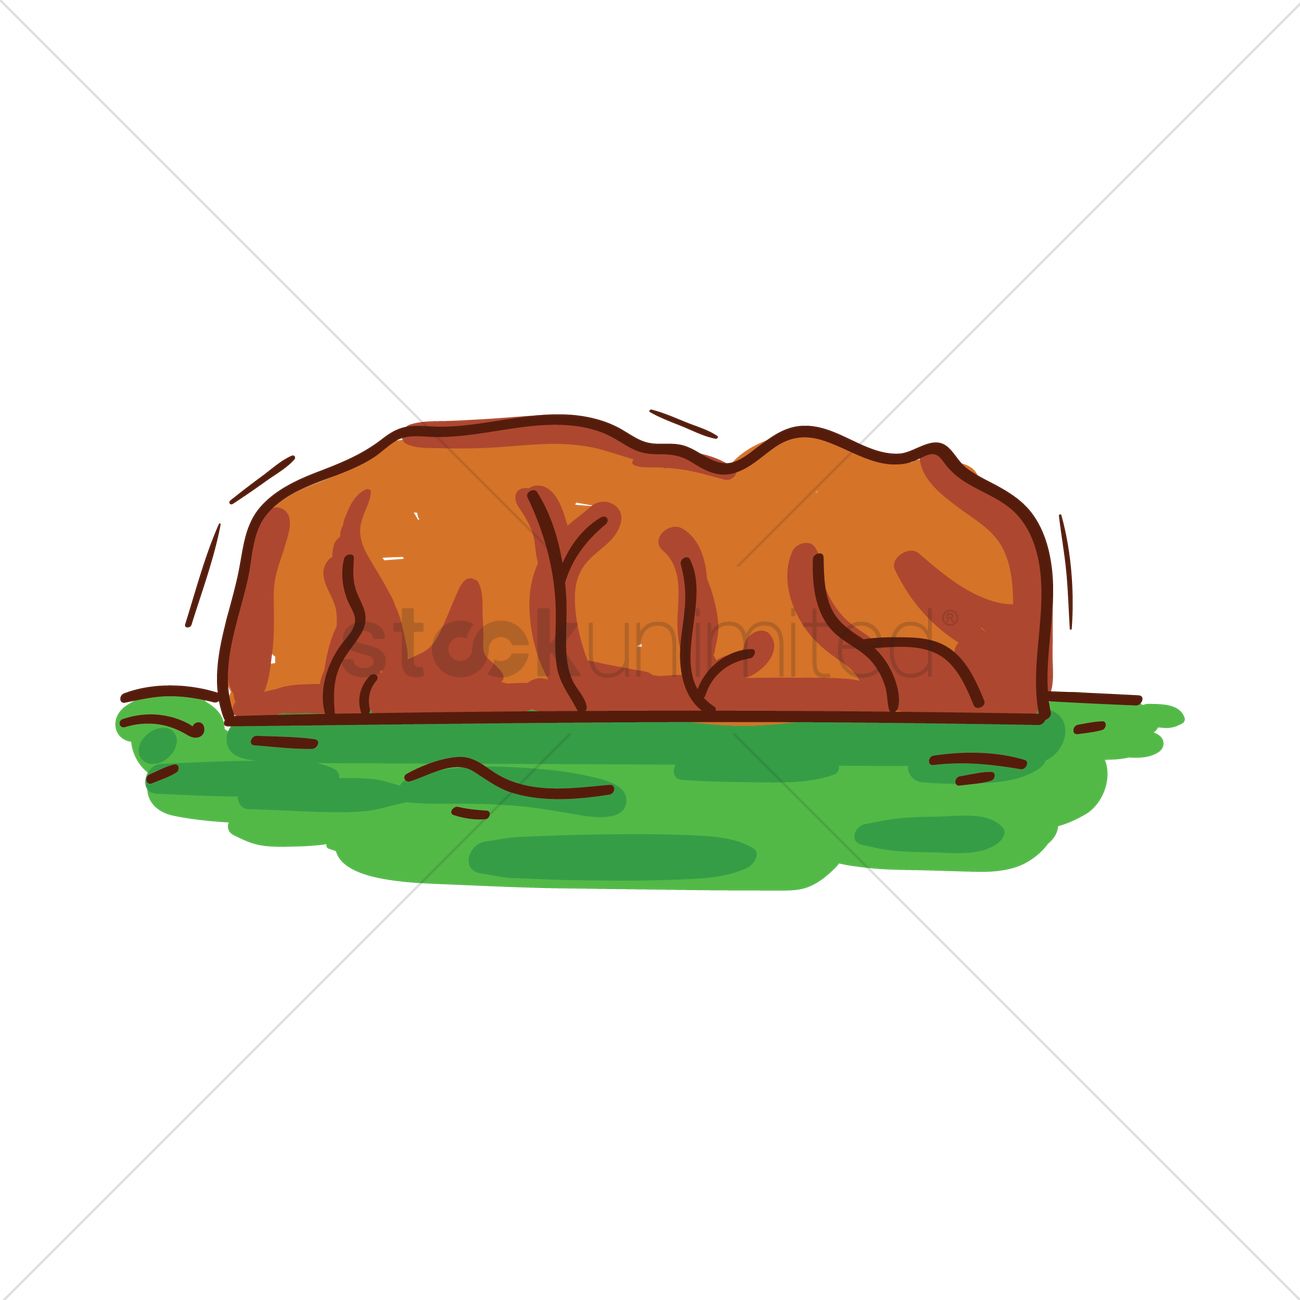 Ayers Rock svg #1, Download drawings